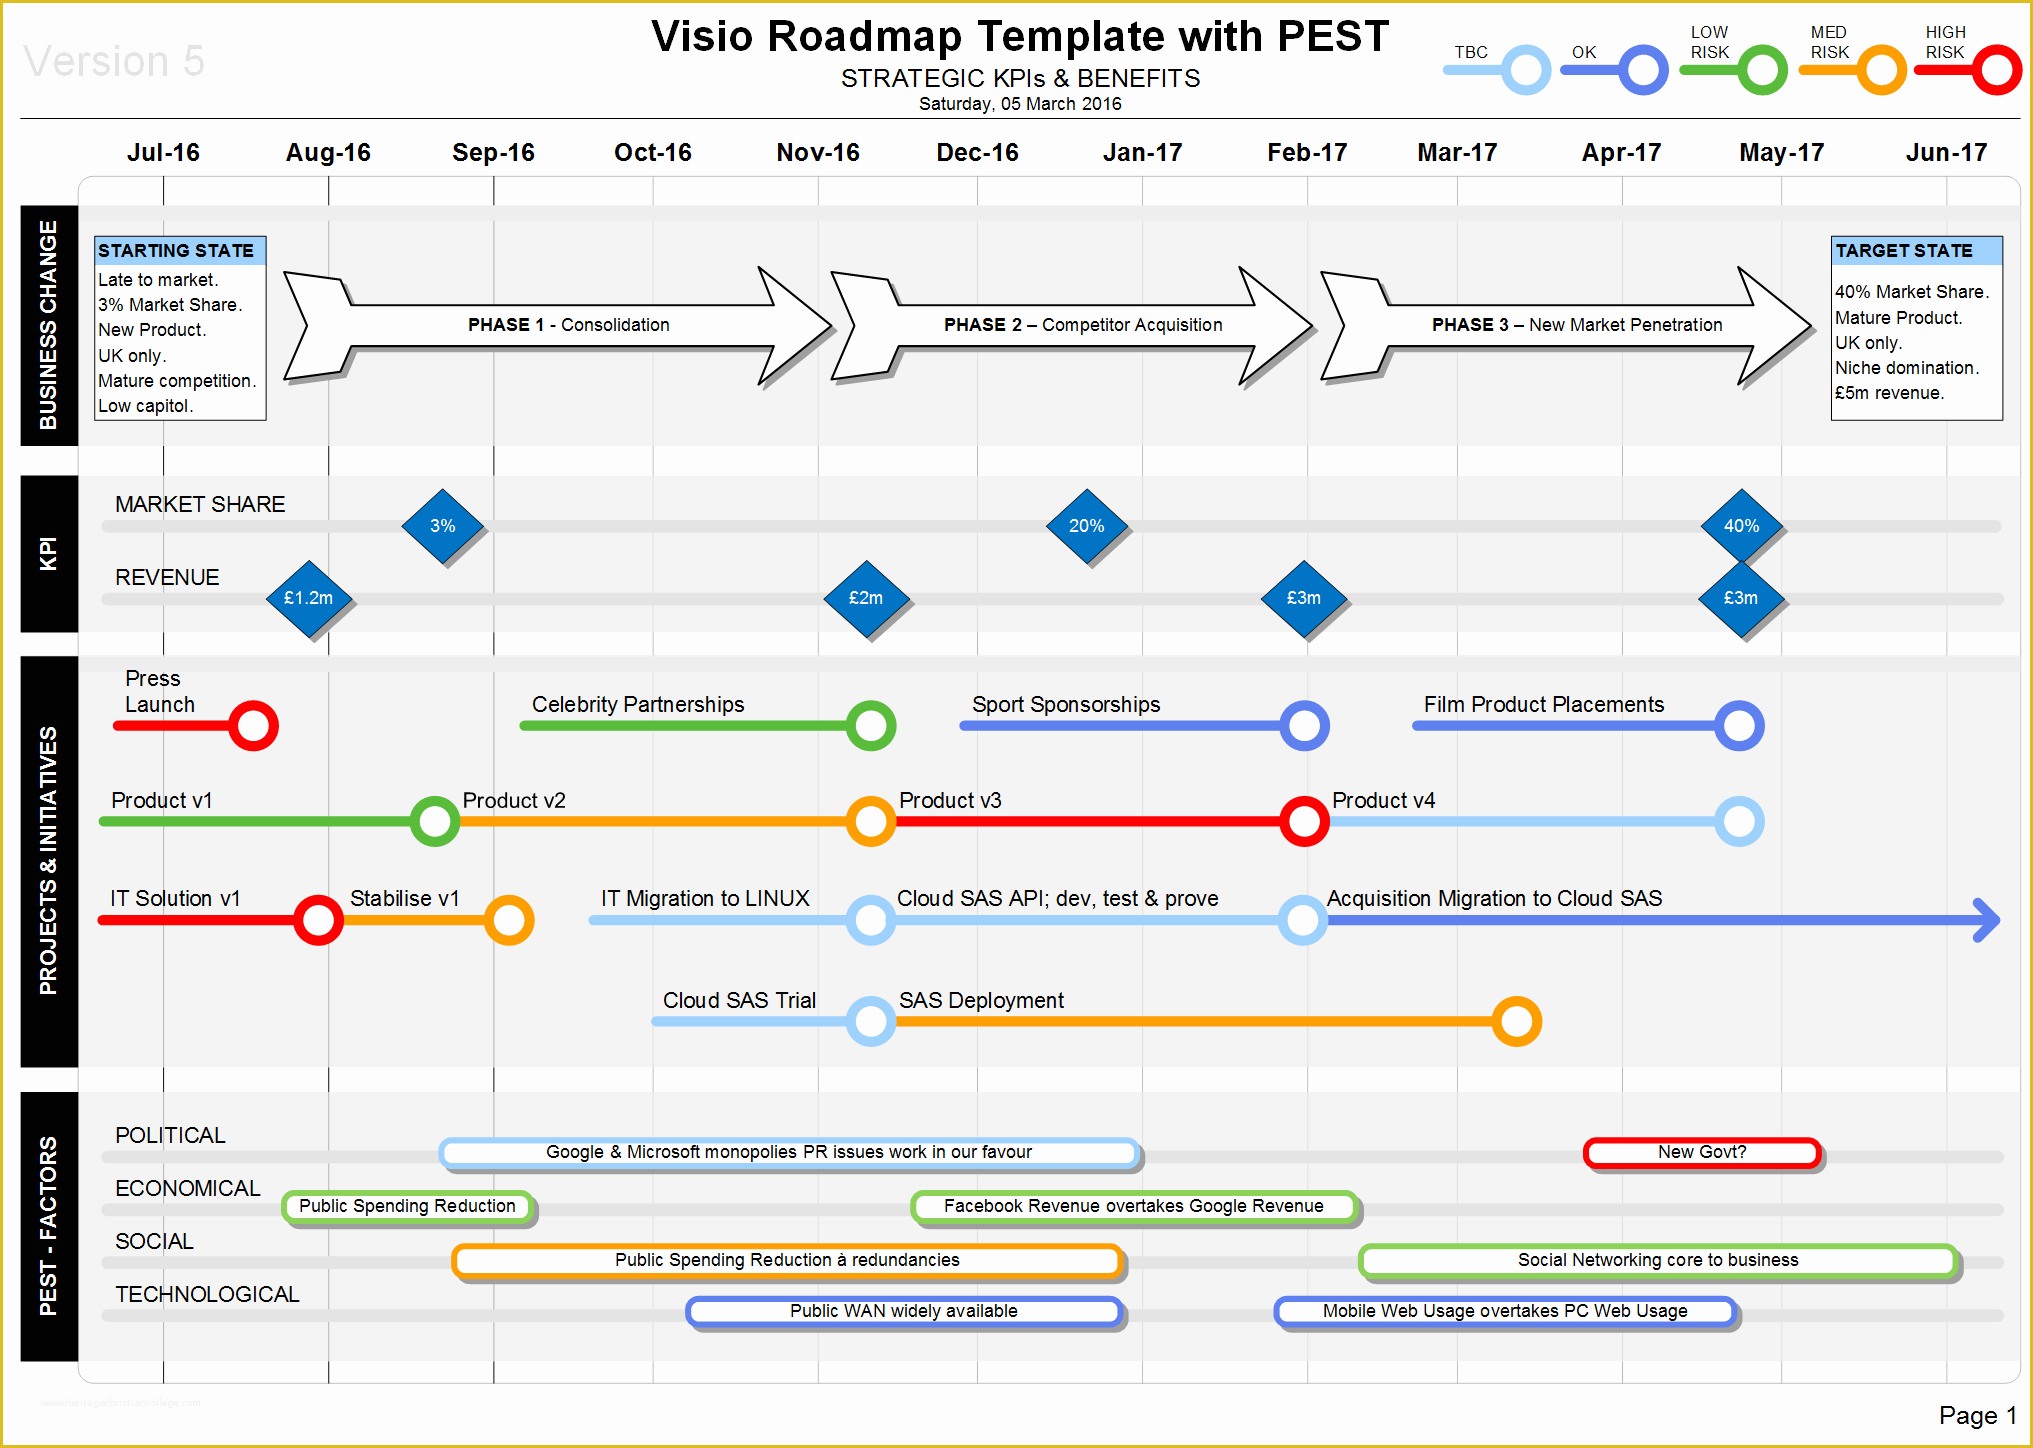 Project Management Roadmap Template Free Of Roadmap with Pest Strategic Insights On Your Roadmaps